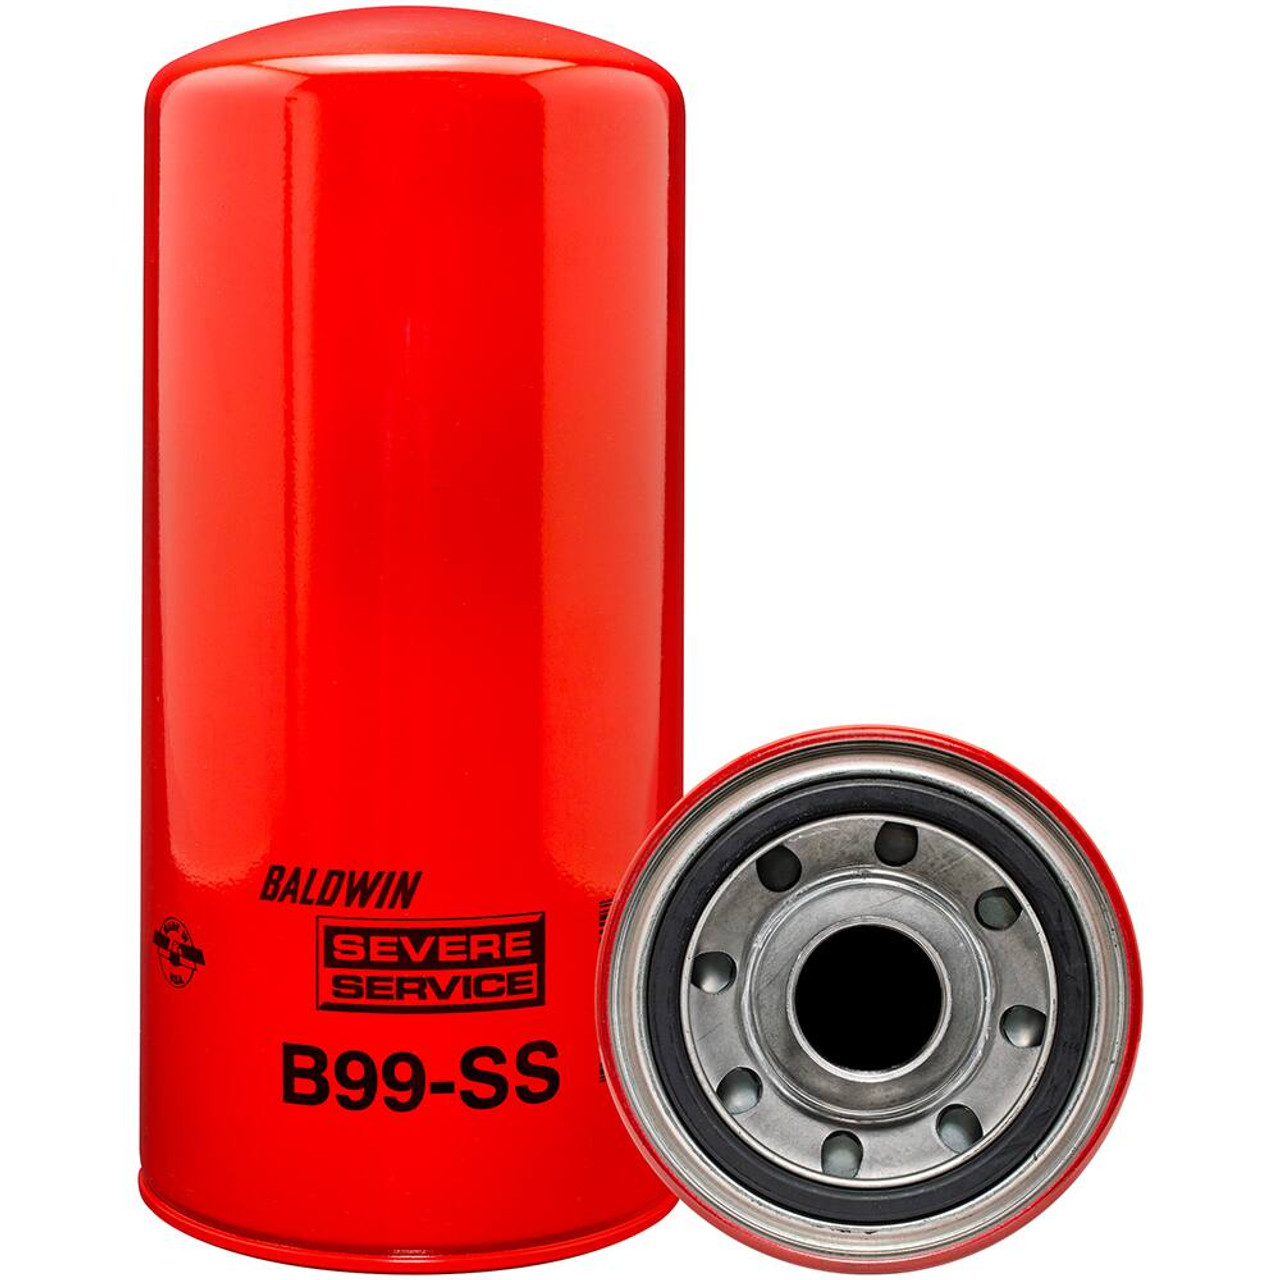 Baldwin B99-SS Severe Service Lube Filter-Spin-on